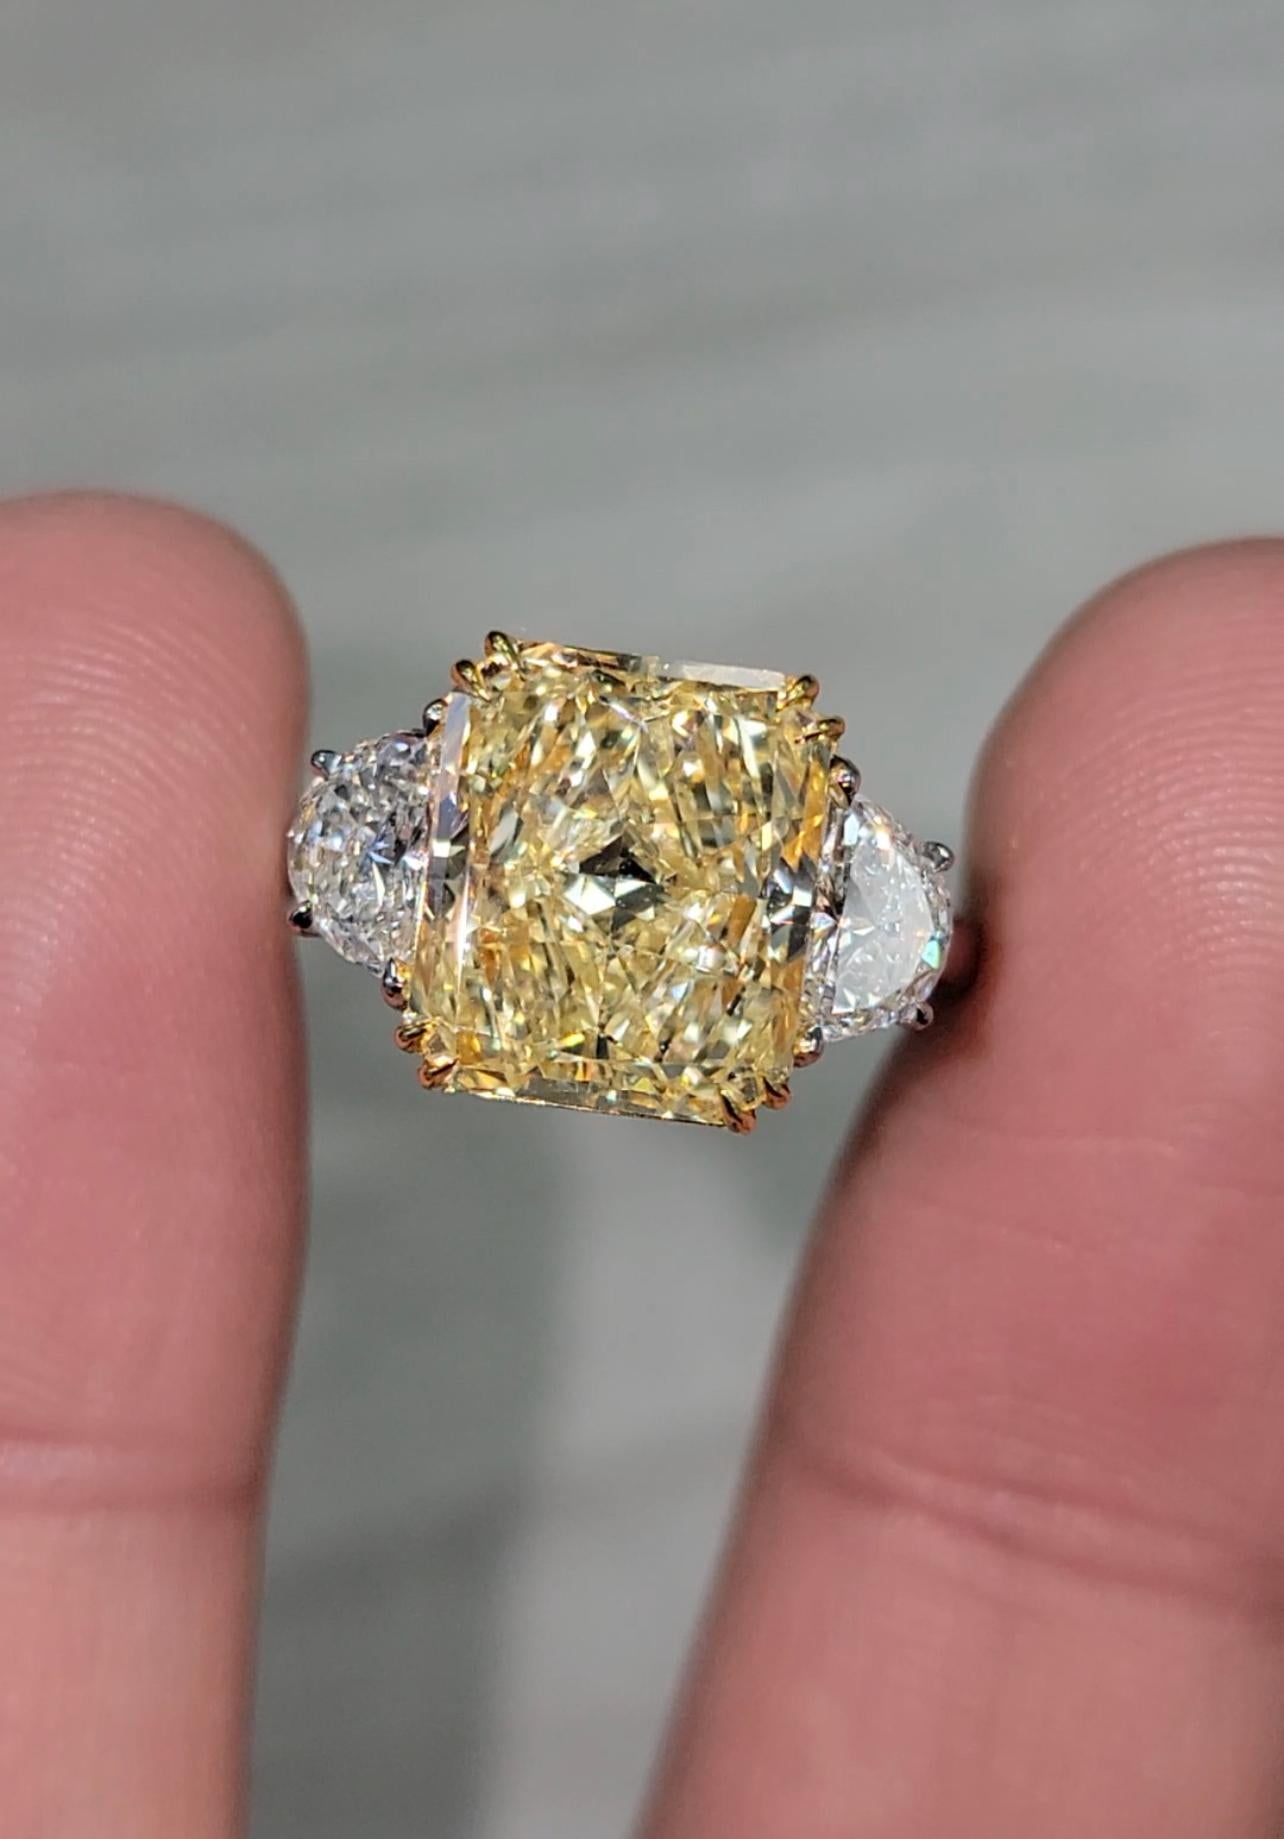 Well made and laid out 5ct Fancy Yellow long radiant set in platinum and 18kt YG with 0.82ct of F VS Half moons


Making Extraordinary Attainable with Rare Colors
